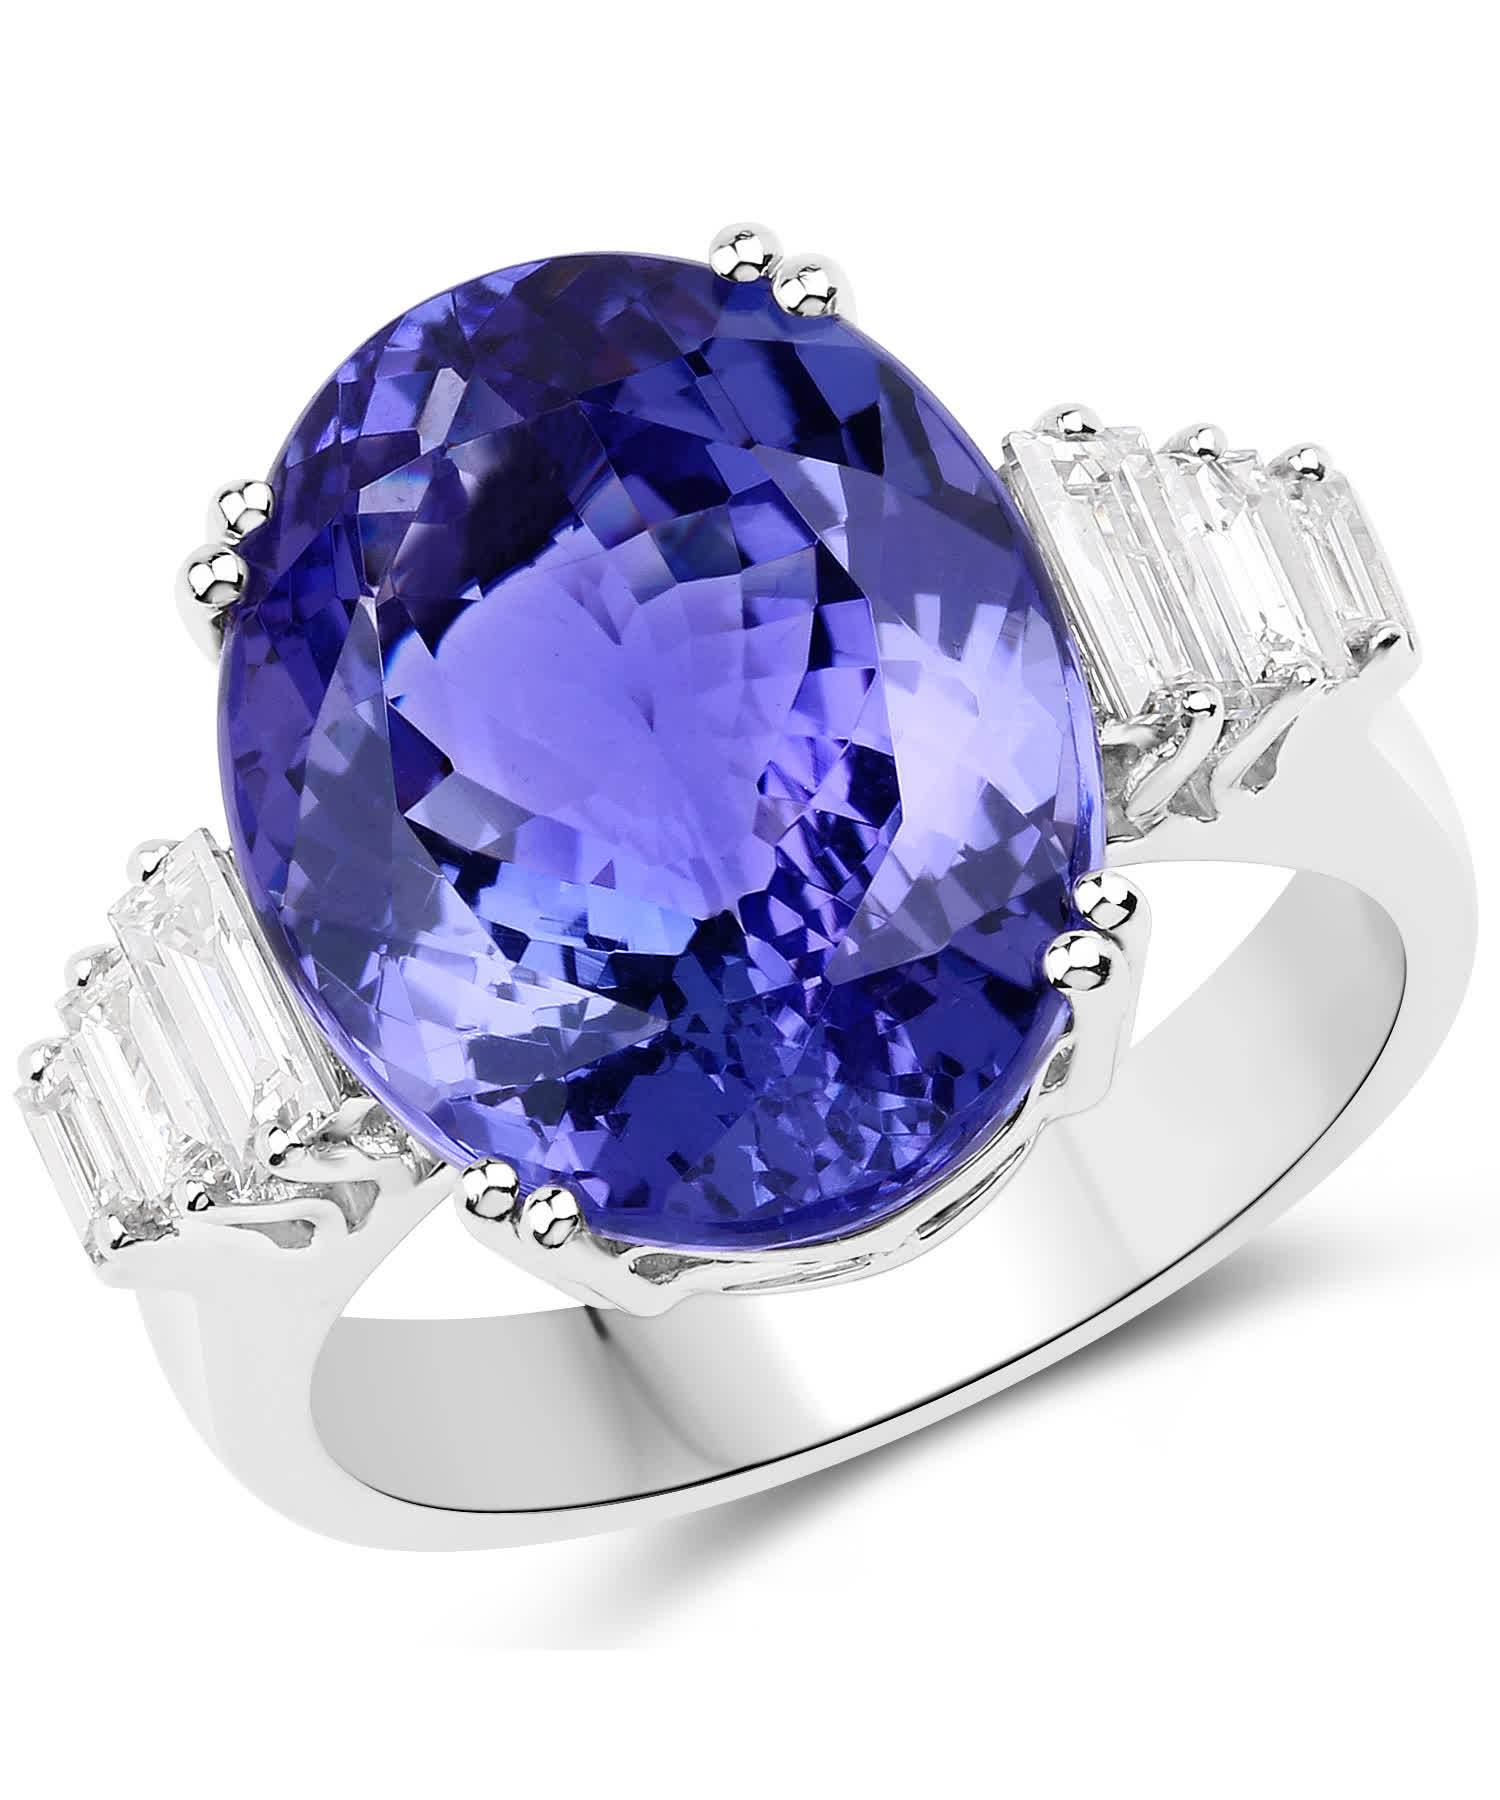 13.95ctw Natural Fine Tanzanite and Diamond 18k Gold Fashion Cocktail Ring View 1